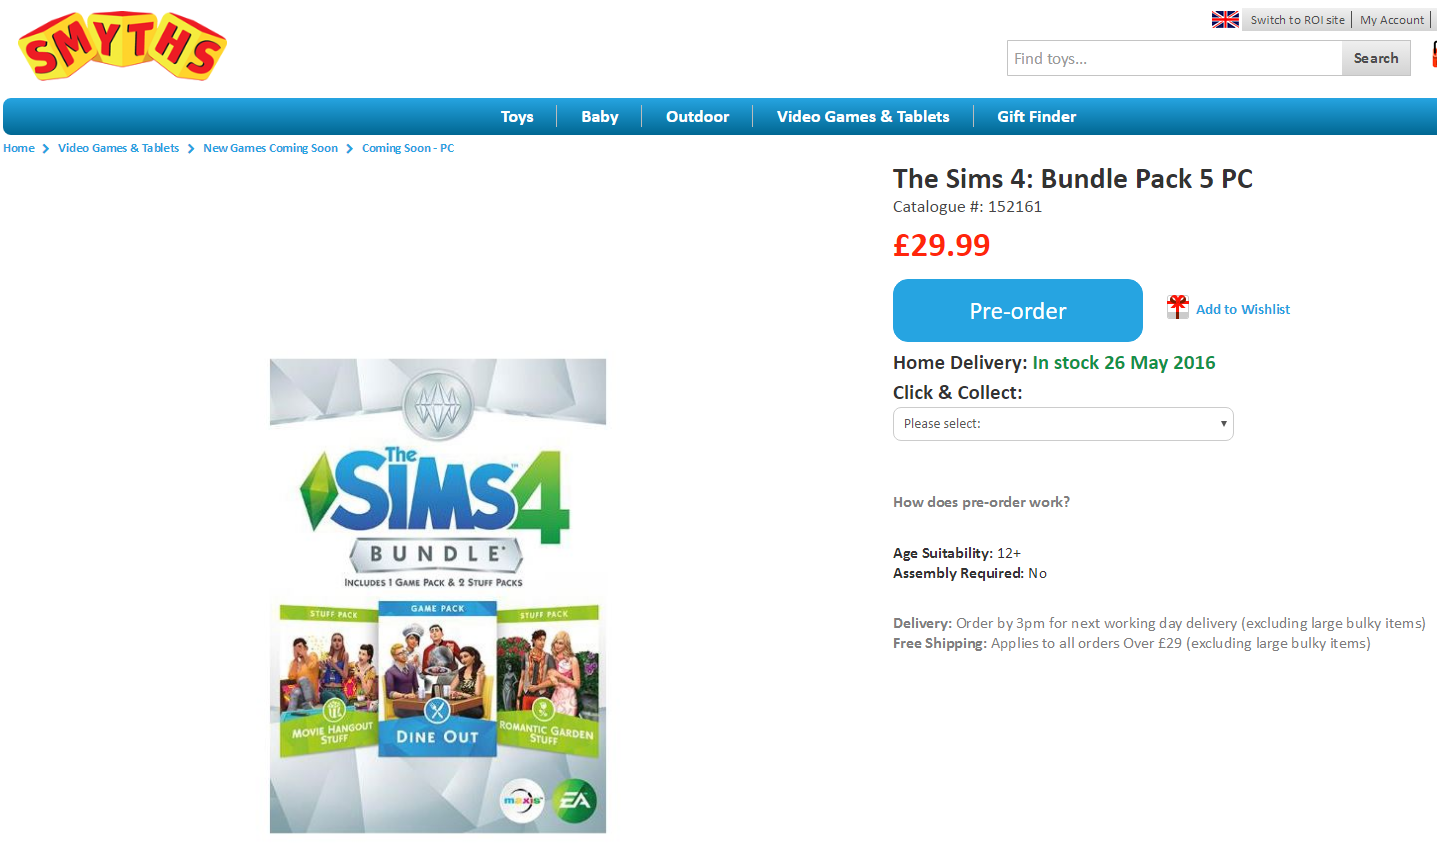 First Details: The Sims 4 "Dine Out" Game Pack Listed on SmythsToys